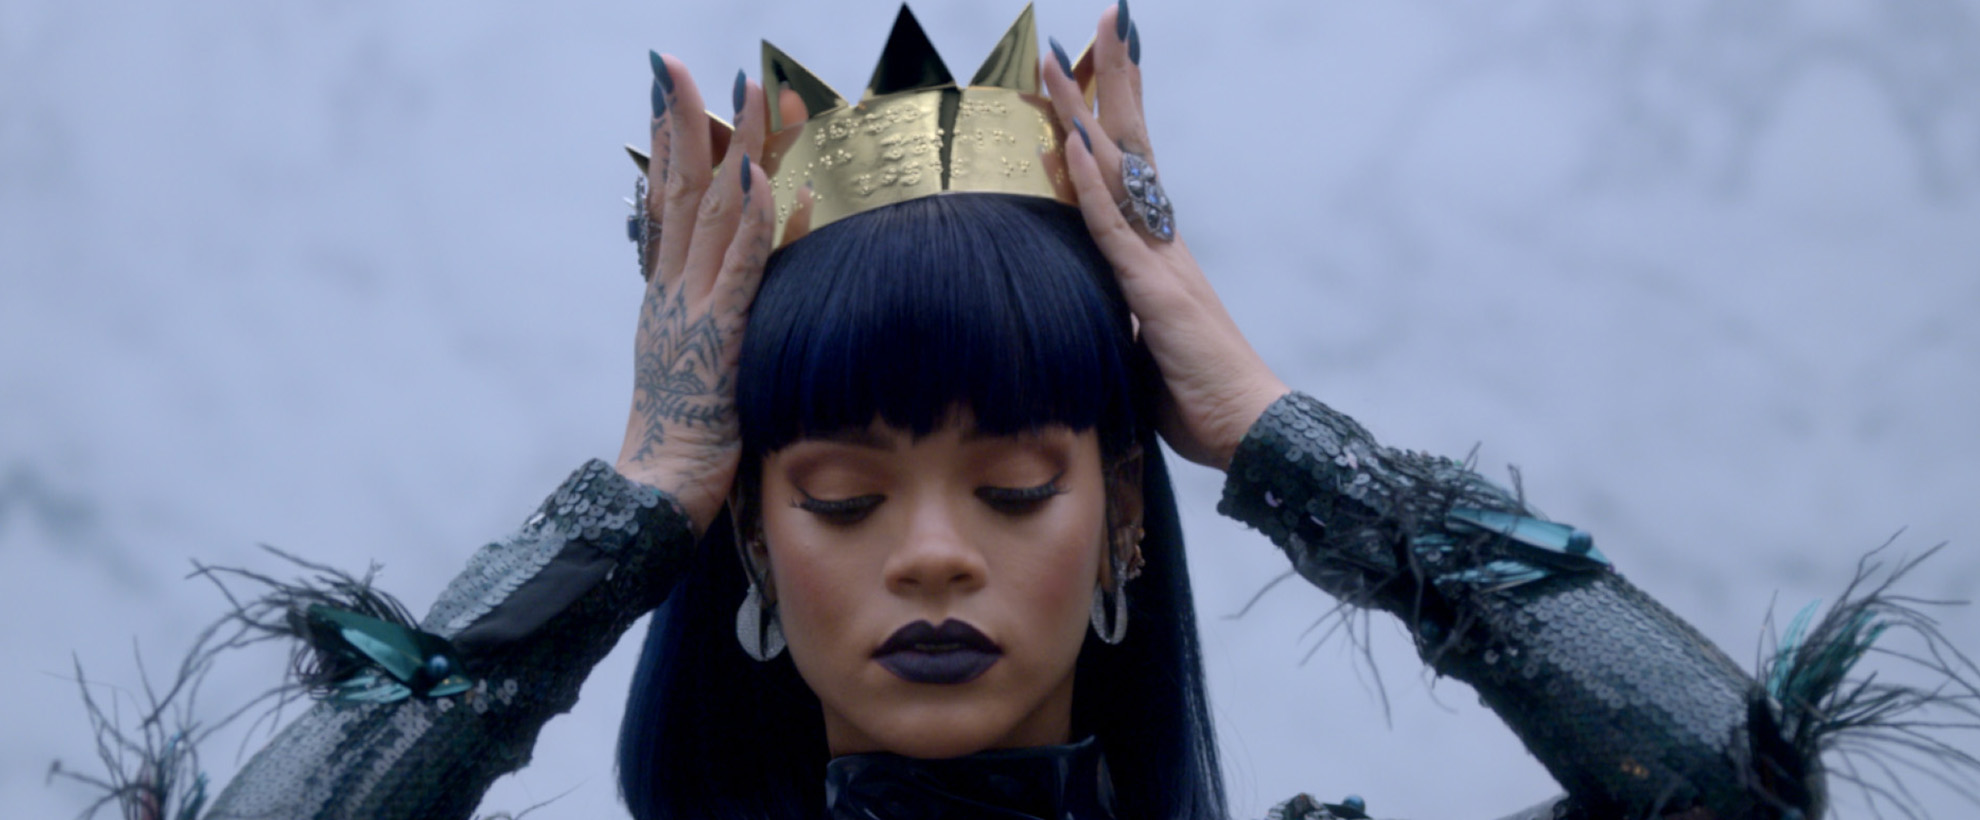 Rihanna puts a crown on her head and looks down